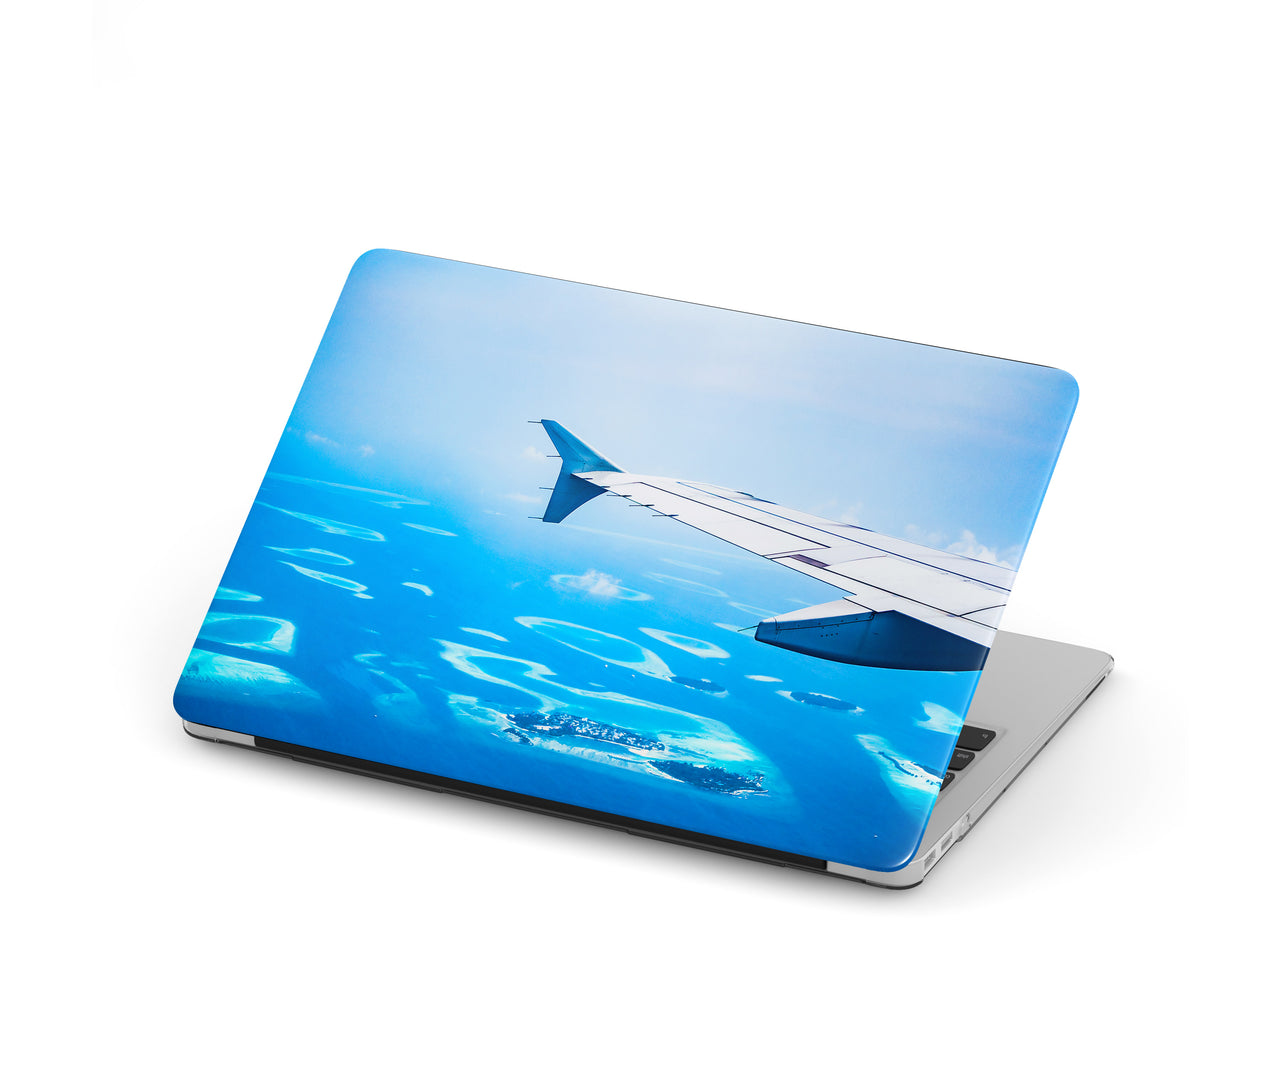 Outstanding View Through Airplane Wing Designed Macbook Cases